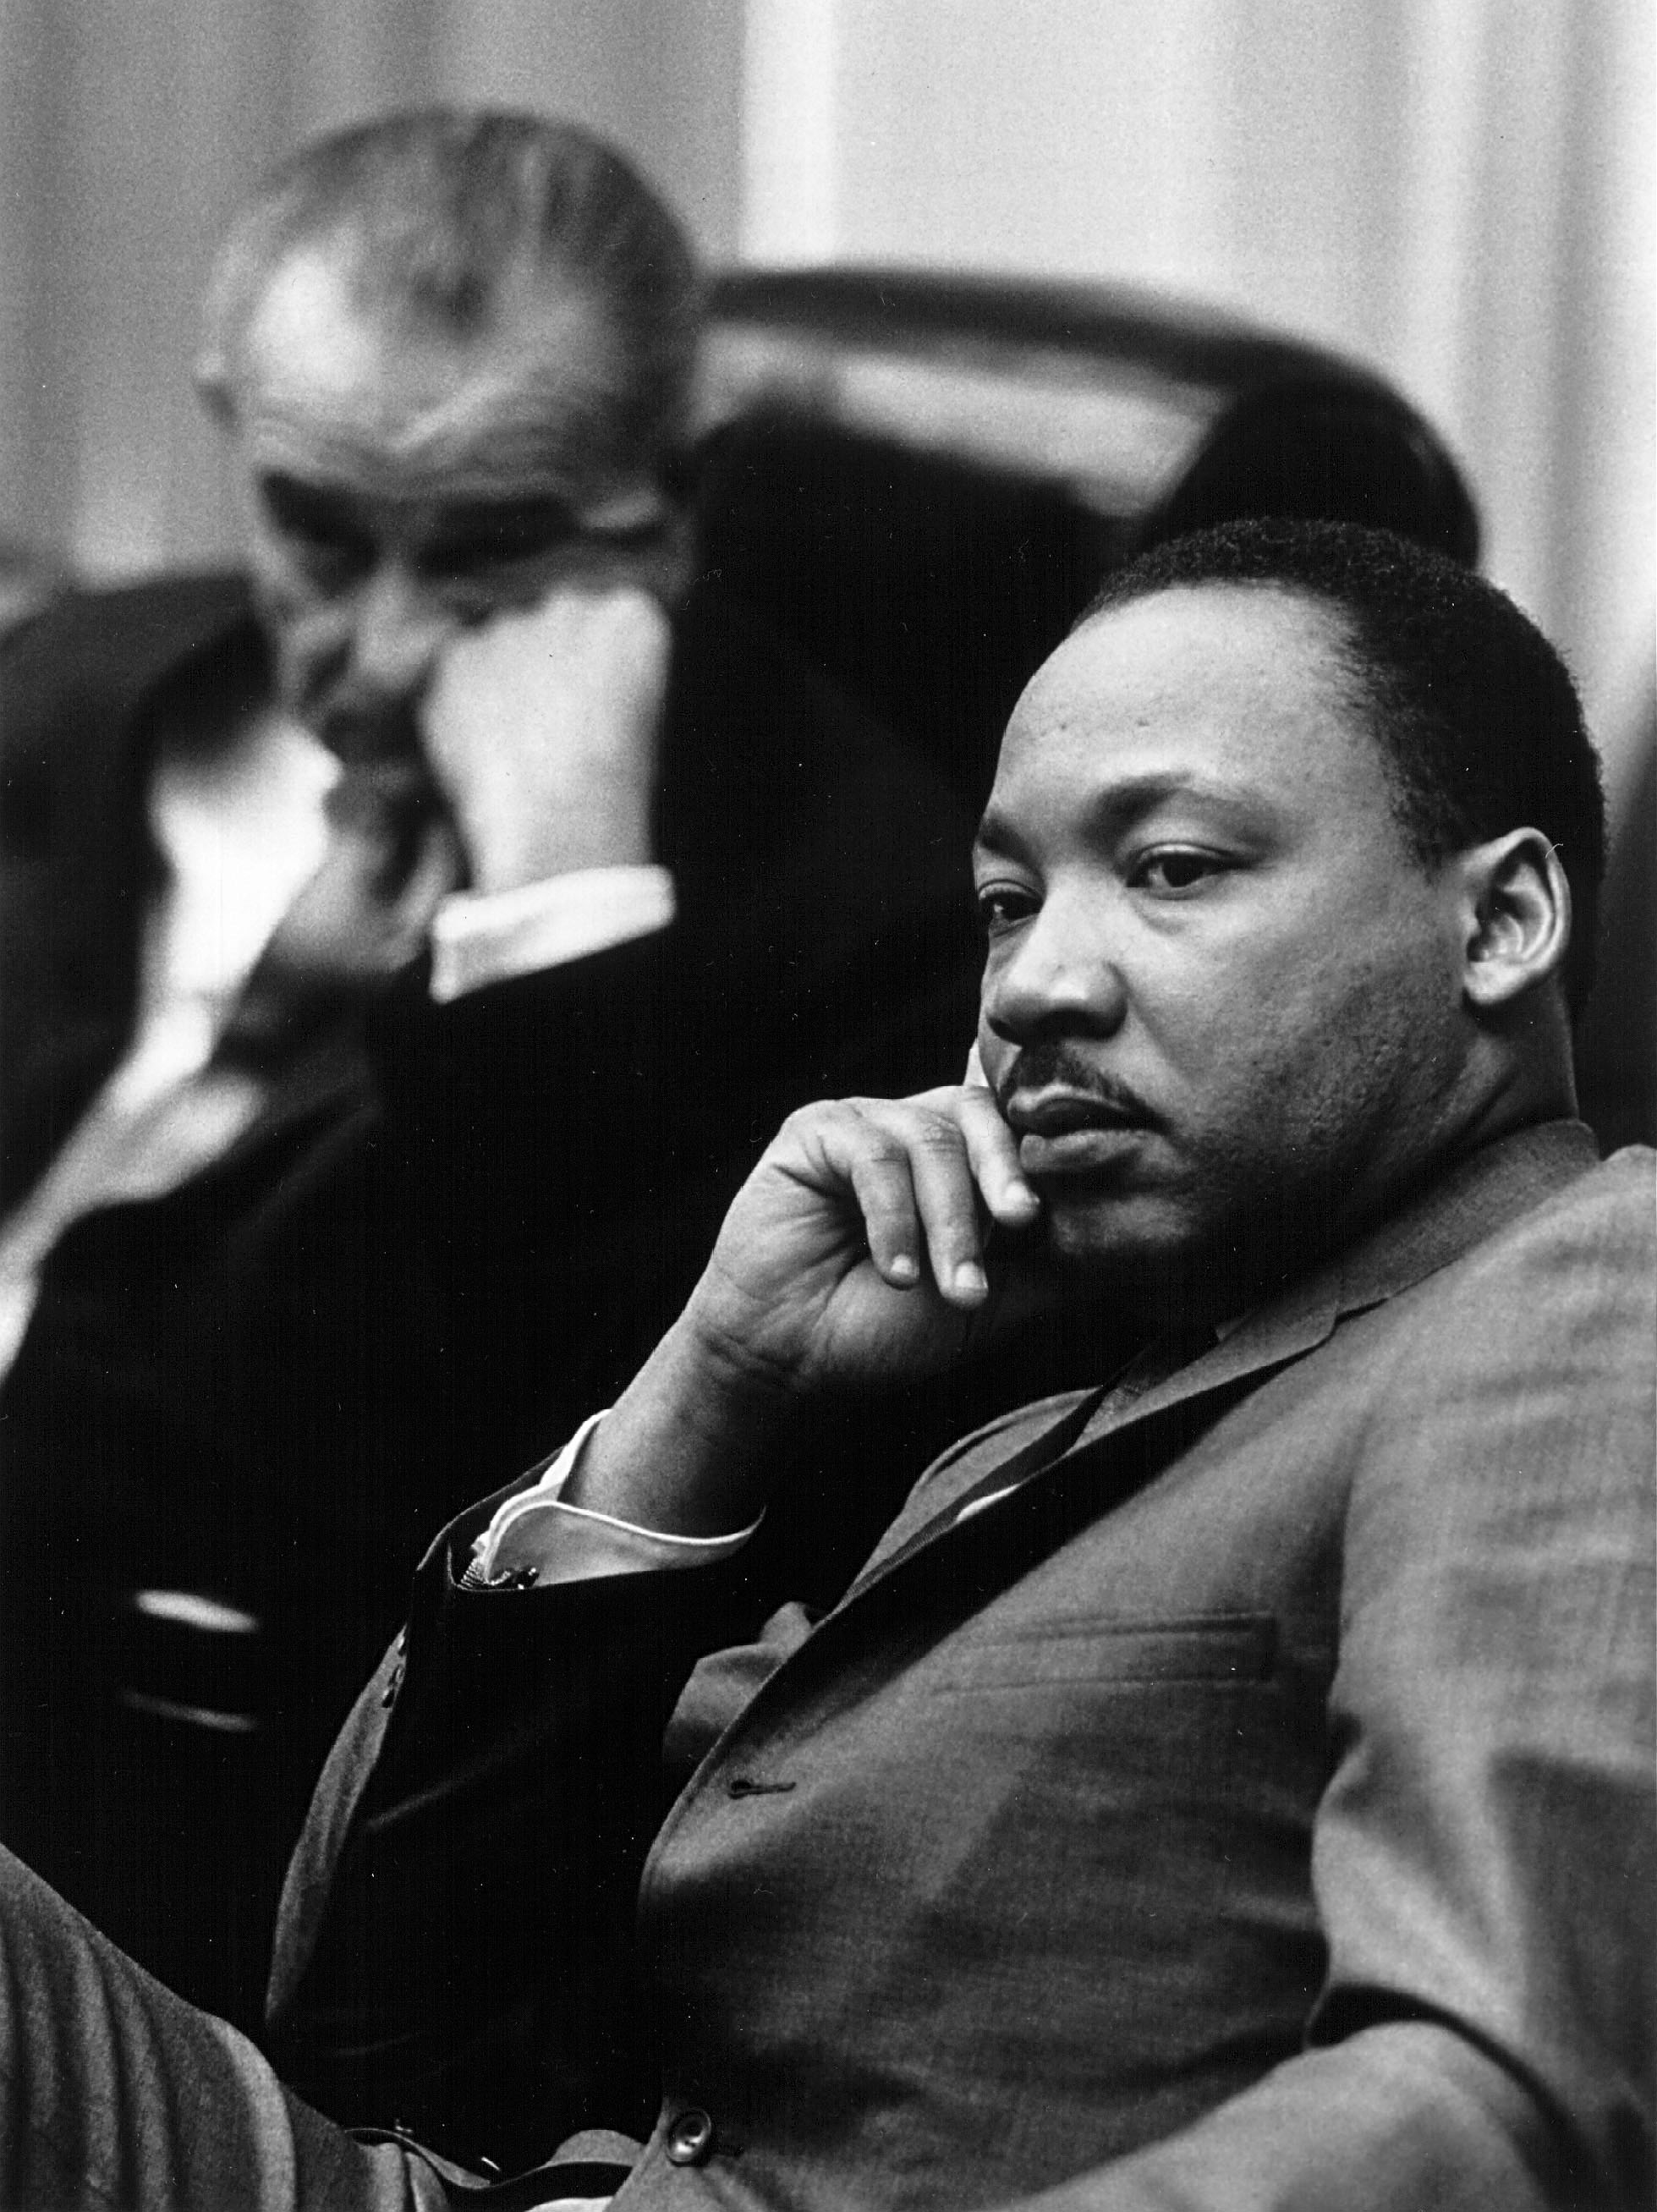 Rev. Martin Luther King Jr. with President Lyndon B. Johnson in the background March 18, 1966 at the White House. | Photo: GettyImages